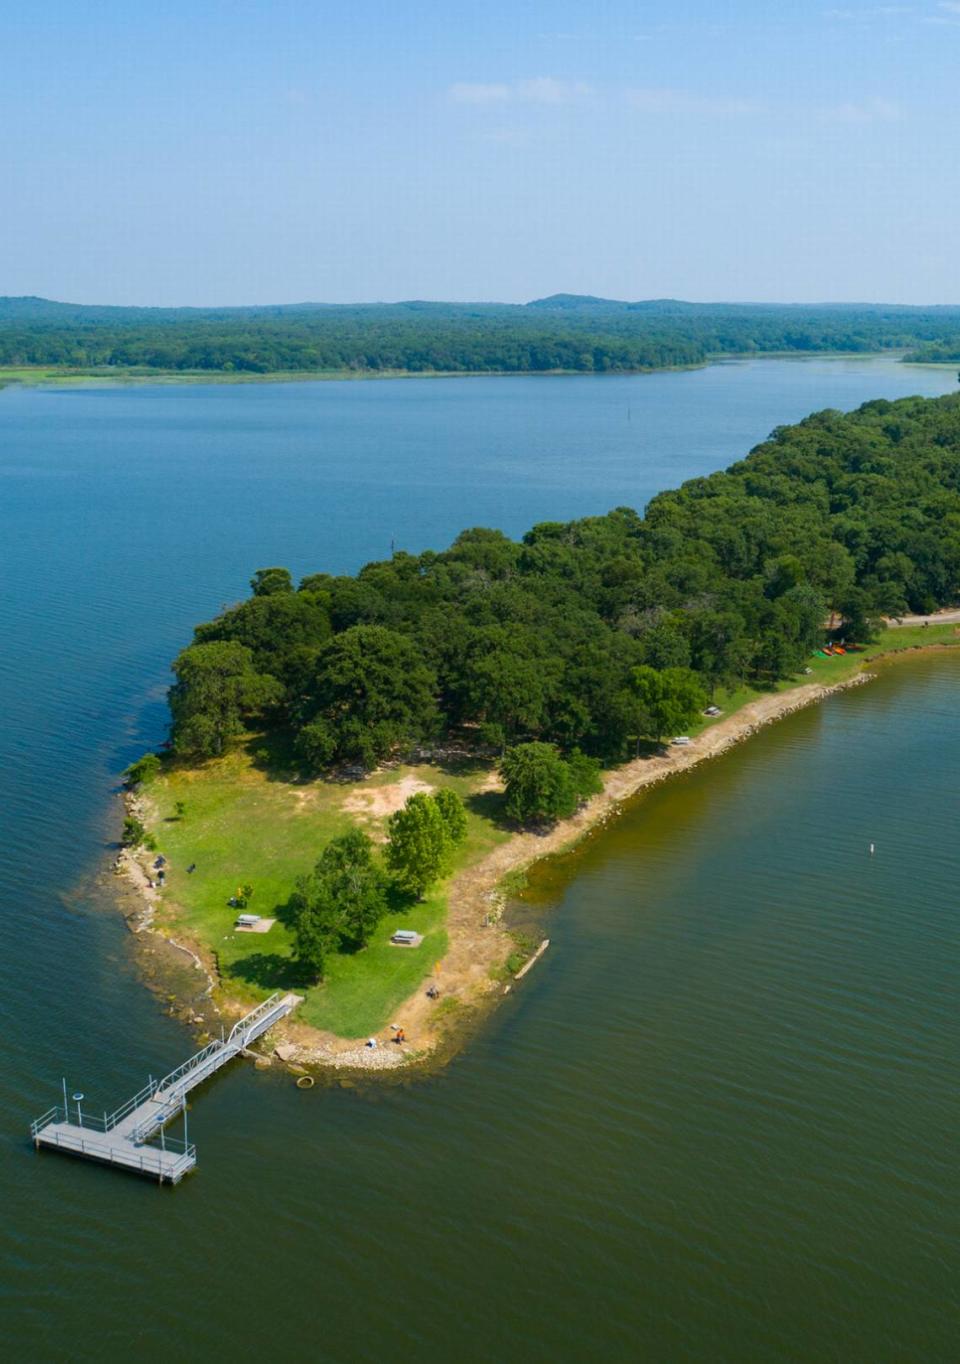 Fairfield Lake State Park, in Freestone County, has been open to the public since 1976. But under a pending sale of the land to a developer, the park could soon close. Earl Nottingham/Texas Parks and Wildlife Department